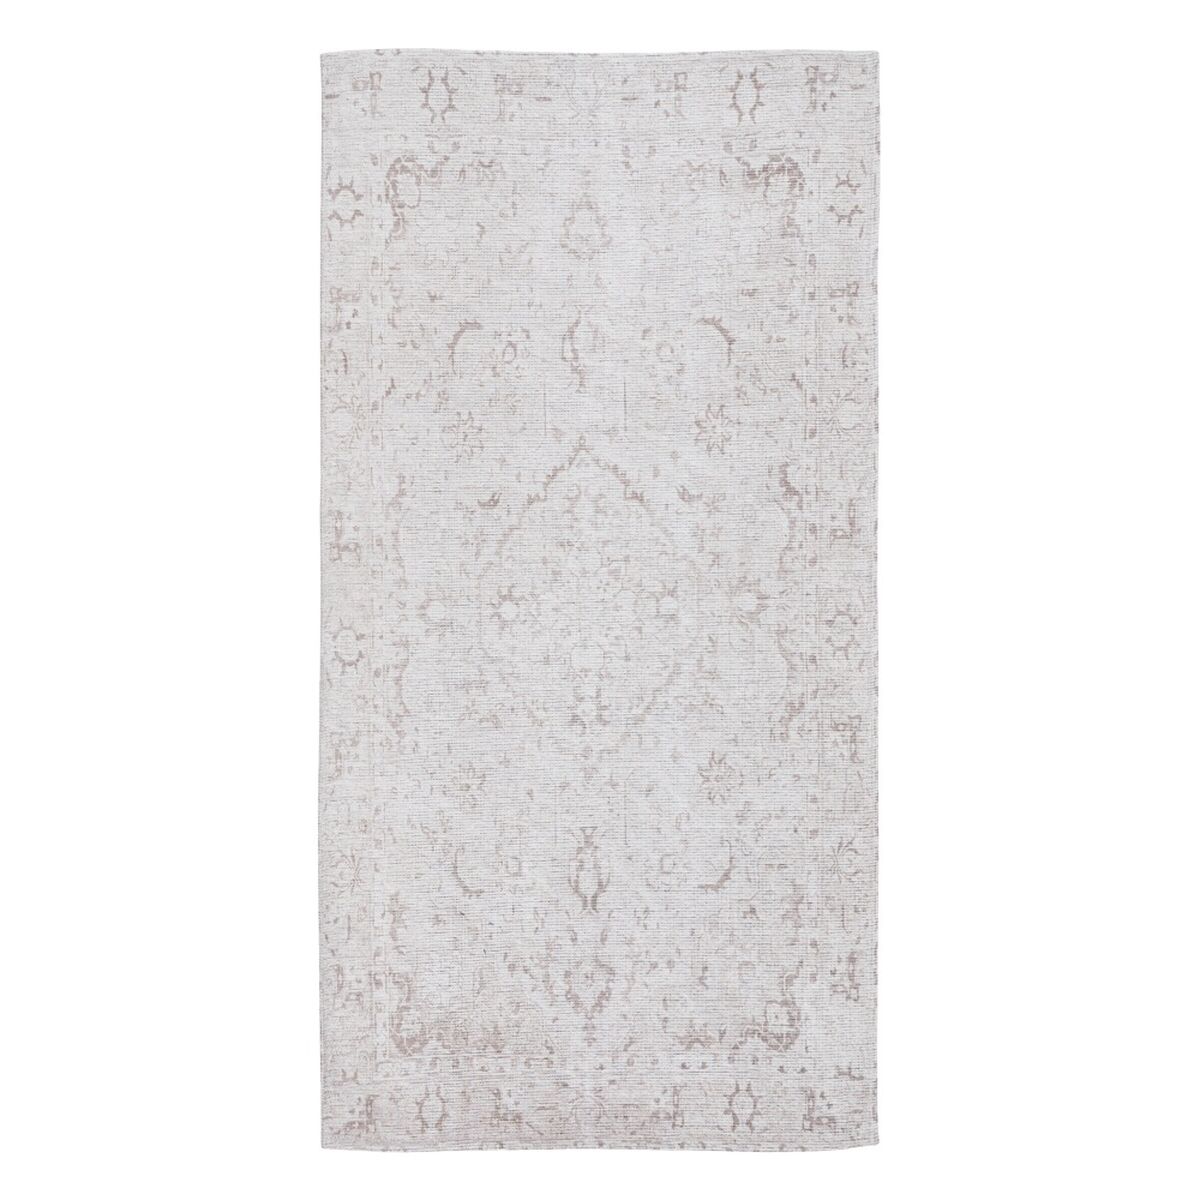 Tapis 80 x 150 cm Polyester Coton Taupe